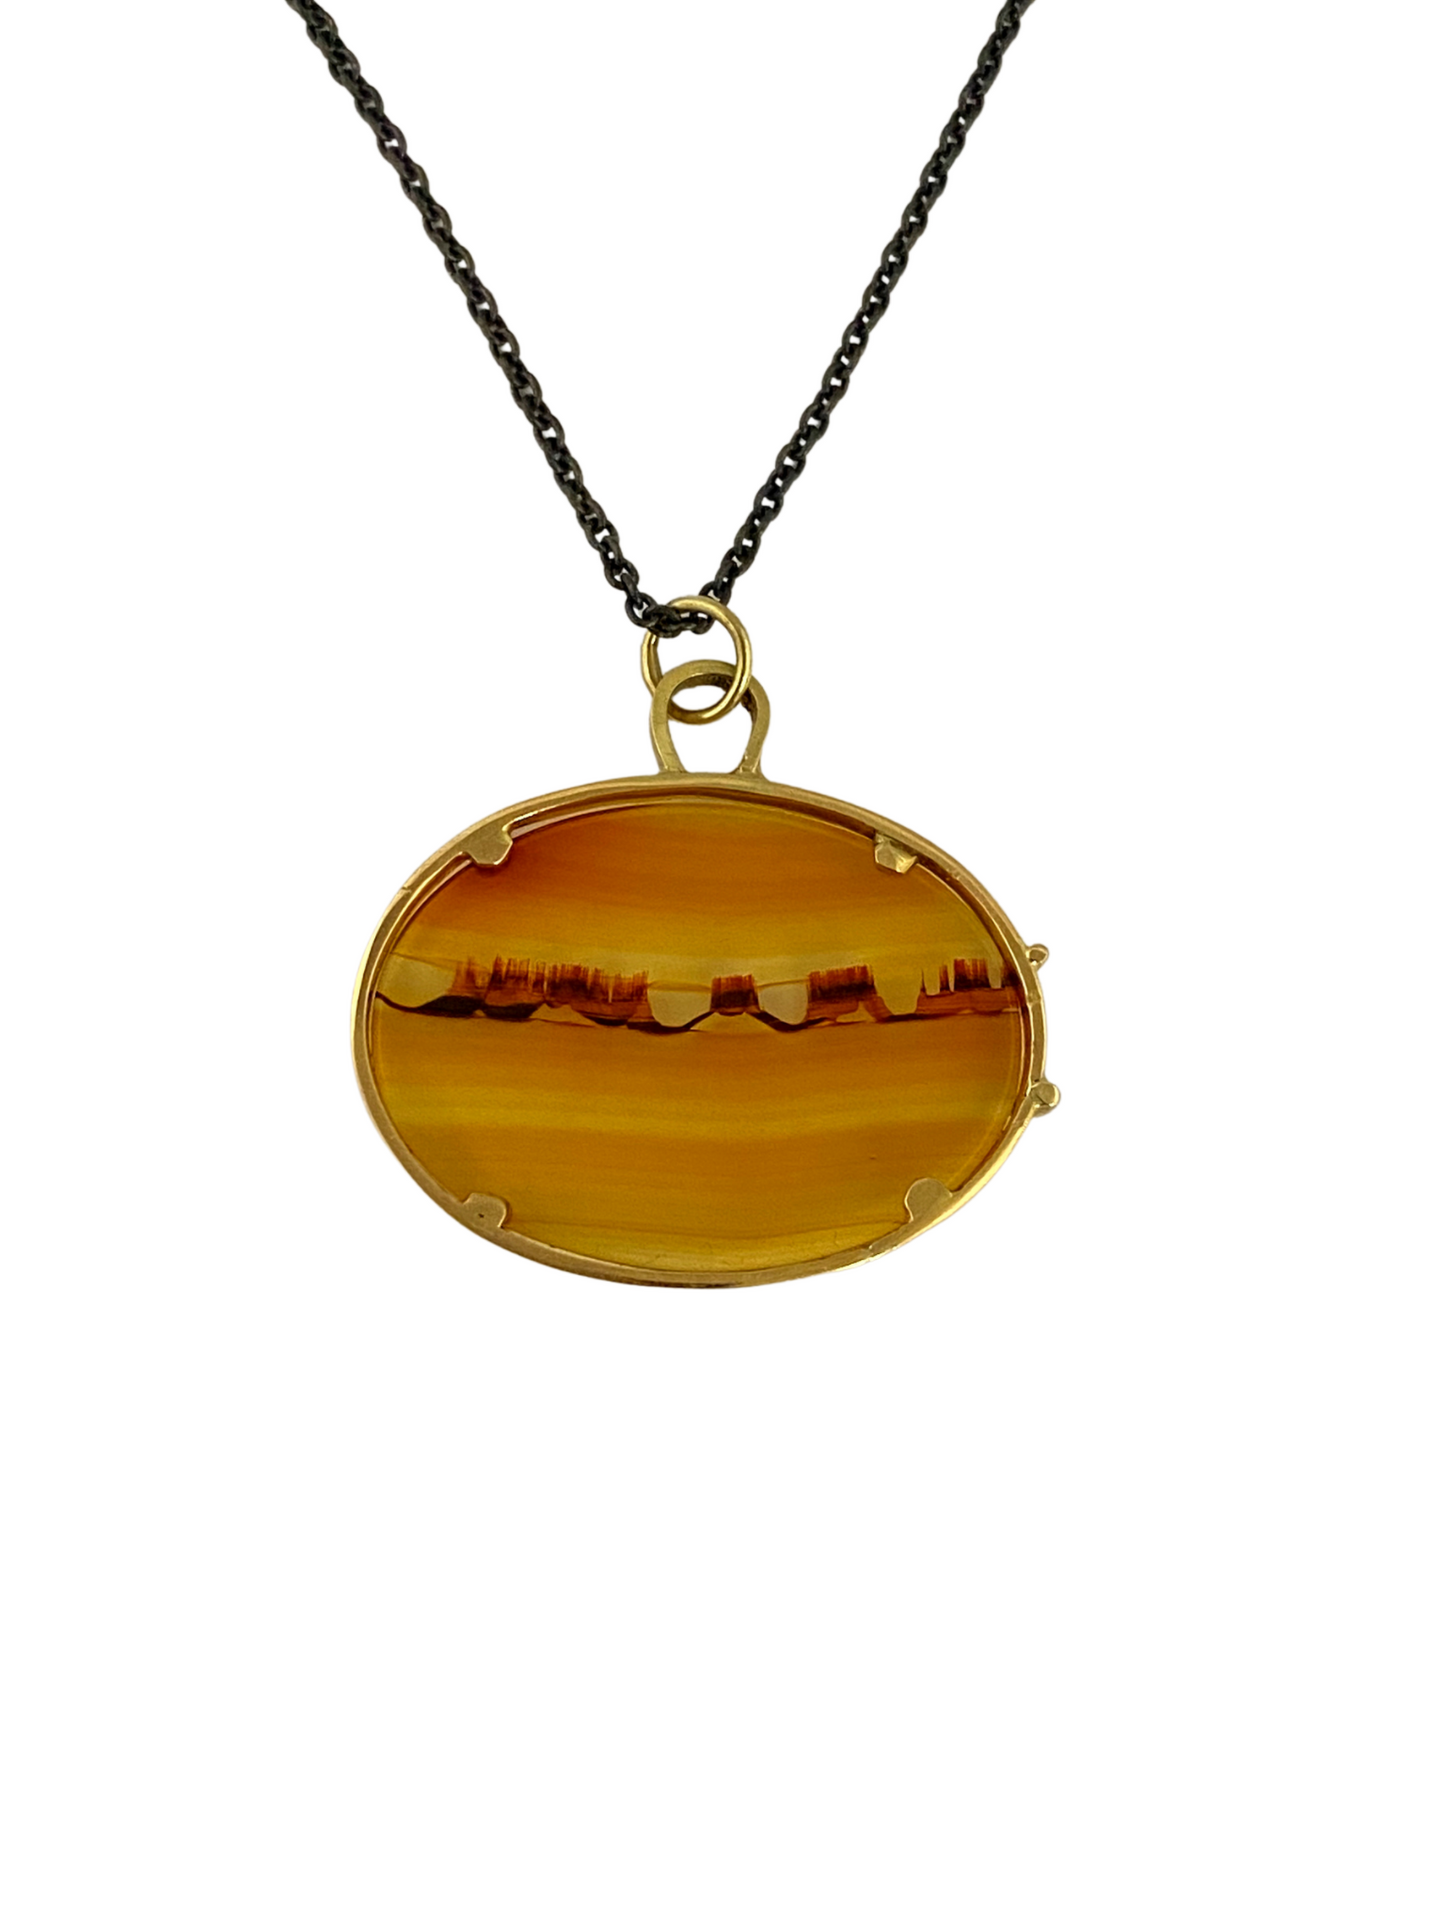 Dendrite agate landscape in 14k gold setting with silver chain